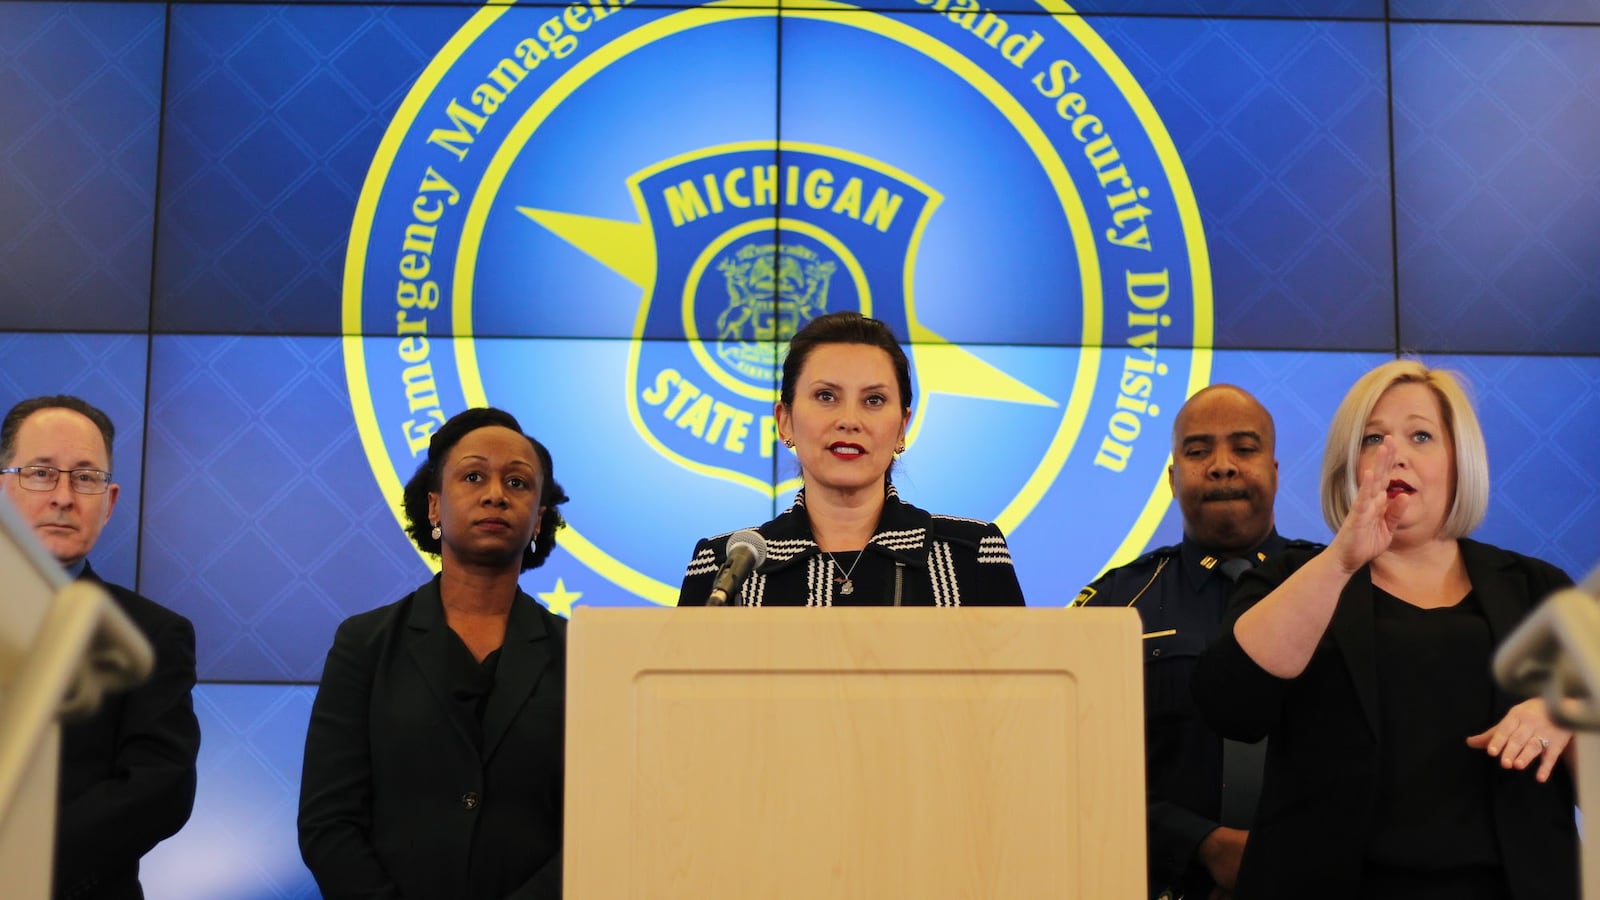 Gov. Gretchen Whitmer addressed the media during a press conference in which she announced the closure of all K-12 schools in the state.